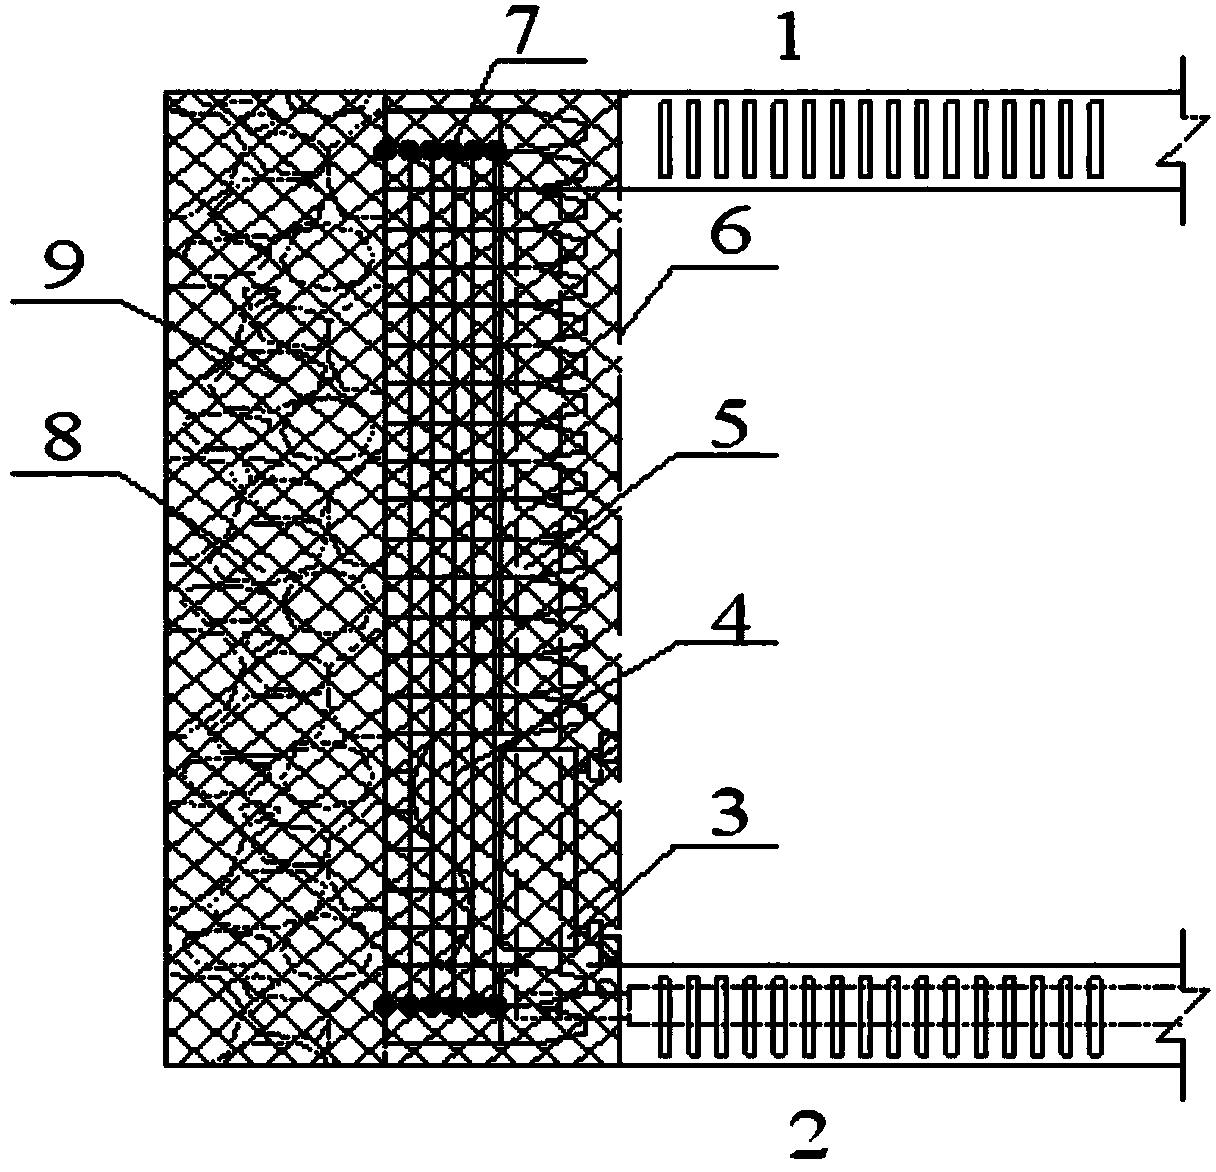 Cover retracement method of dense steel wire ropes of coal face